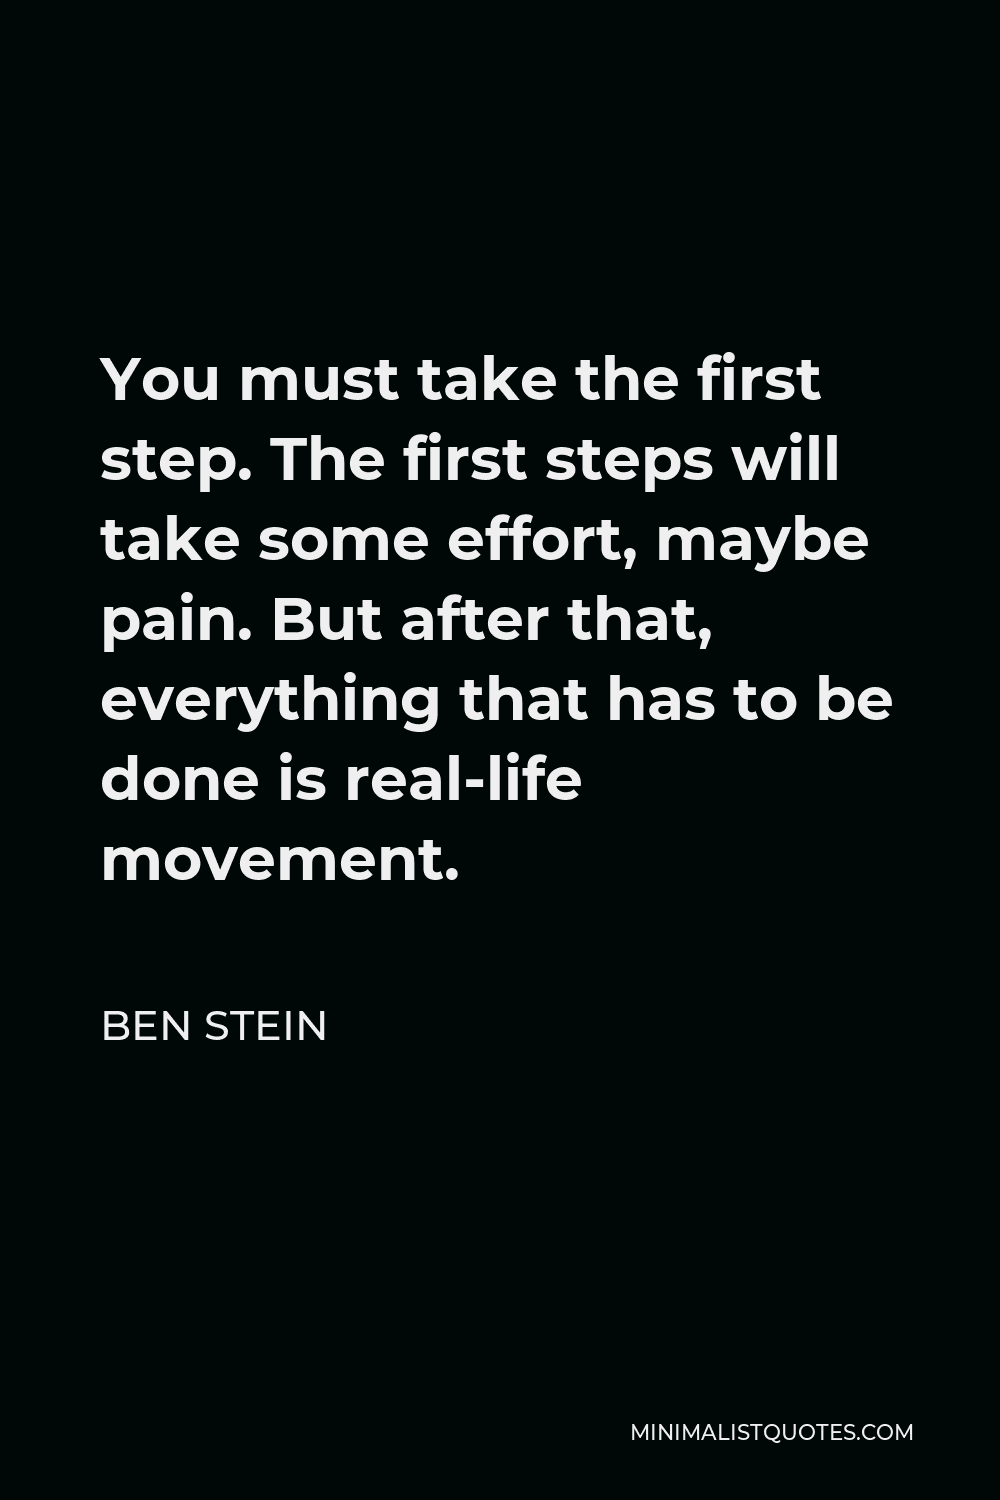 Ben Stein Quote - You must take the first step. The first steps will take some effort, maybe pain. But after that, everything that has to be done is real-life movement.